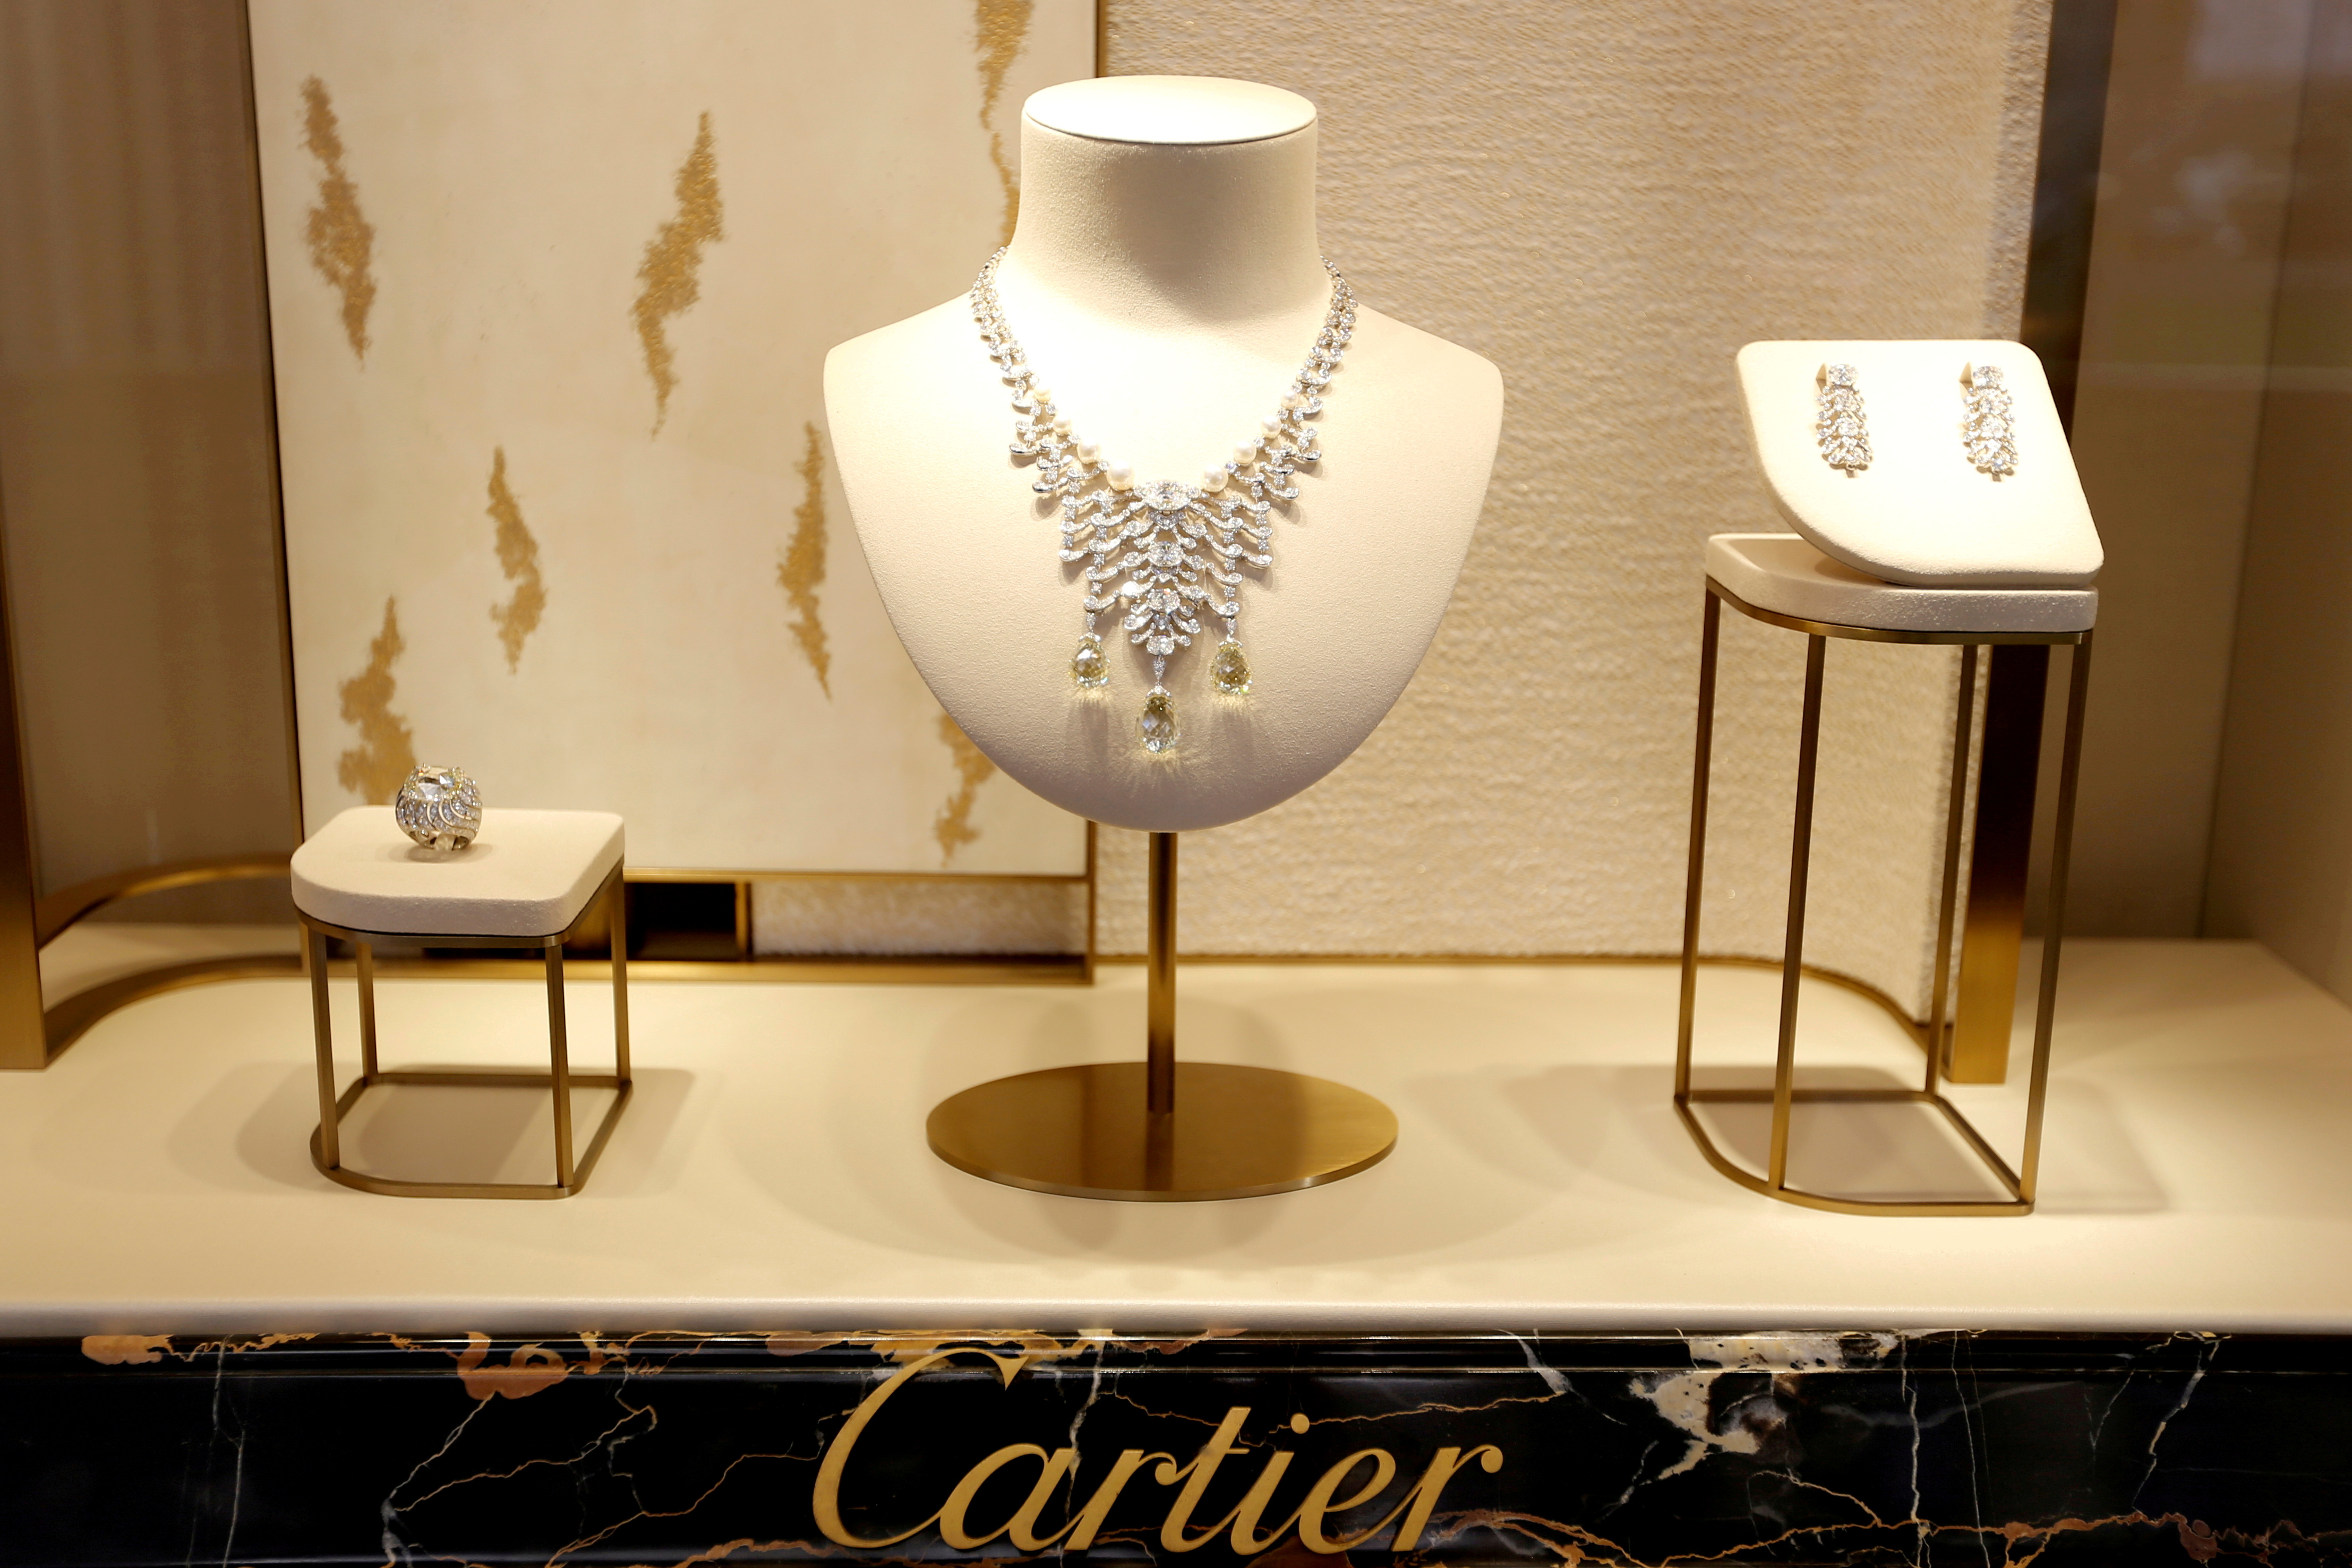 High-end jewellery is displayed at a Cartier store on Place Vendome in Paris, France, July 2, 2019.  REUTERS/Regis Duvignau/File Photo